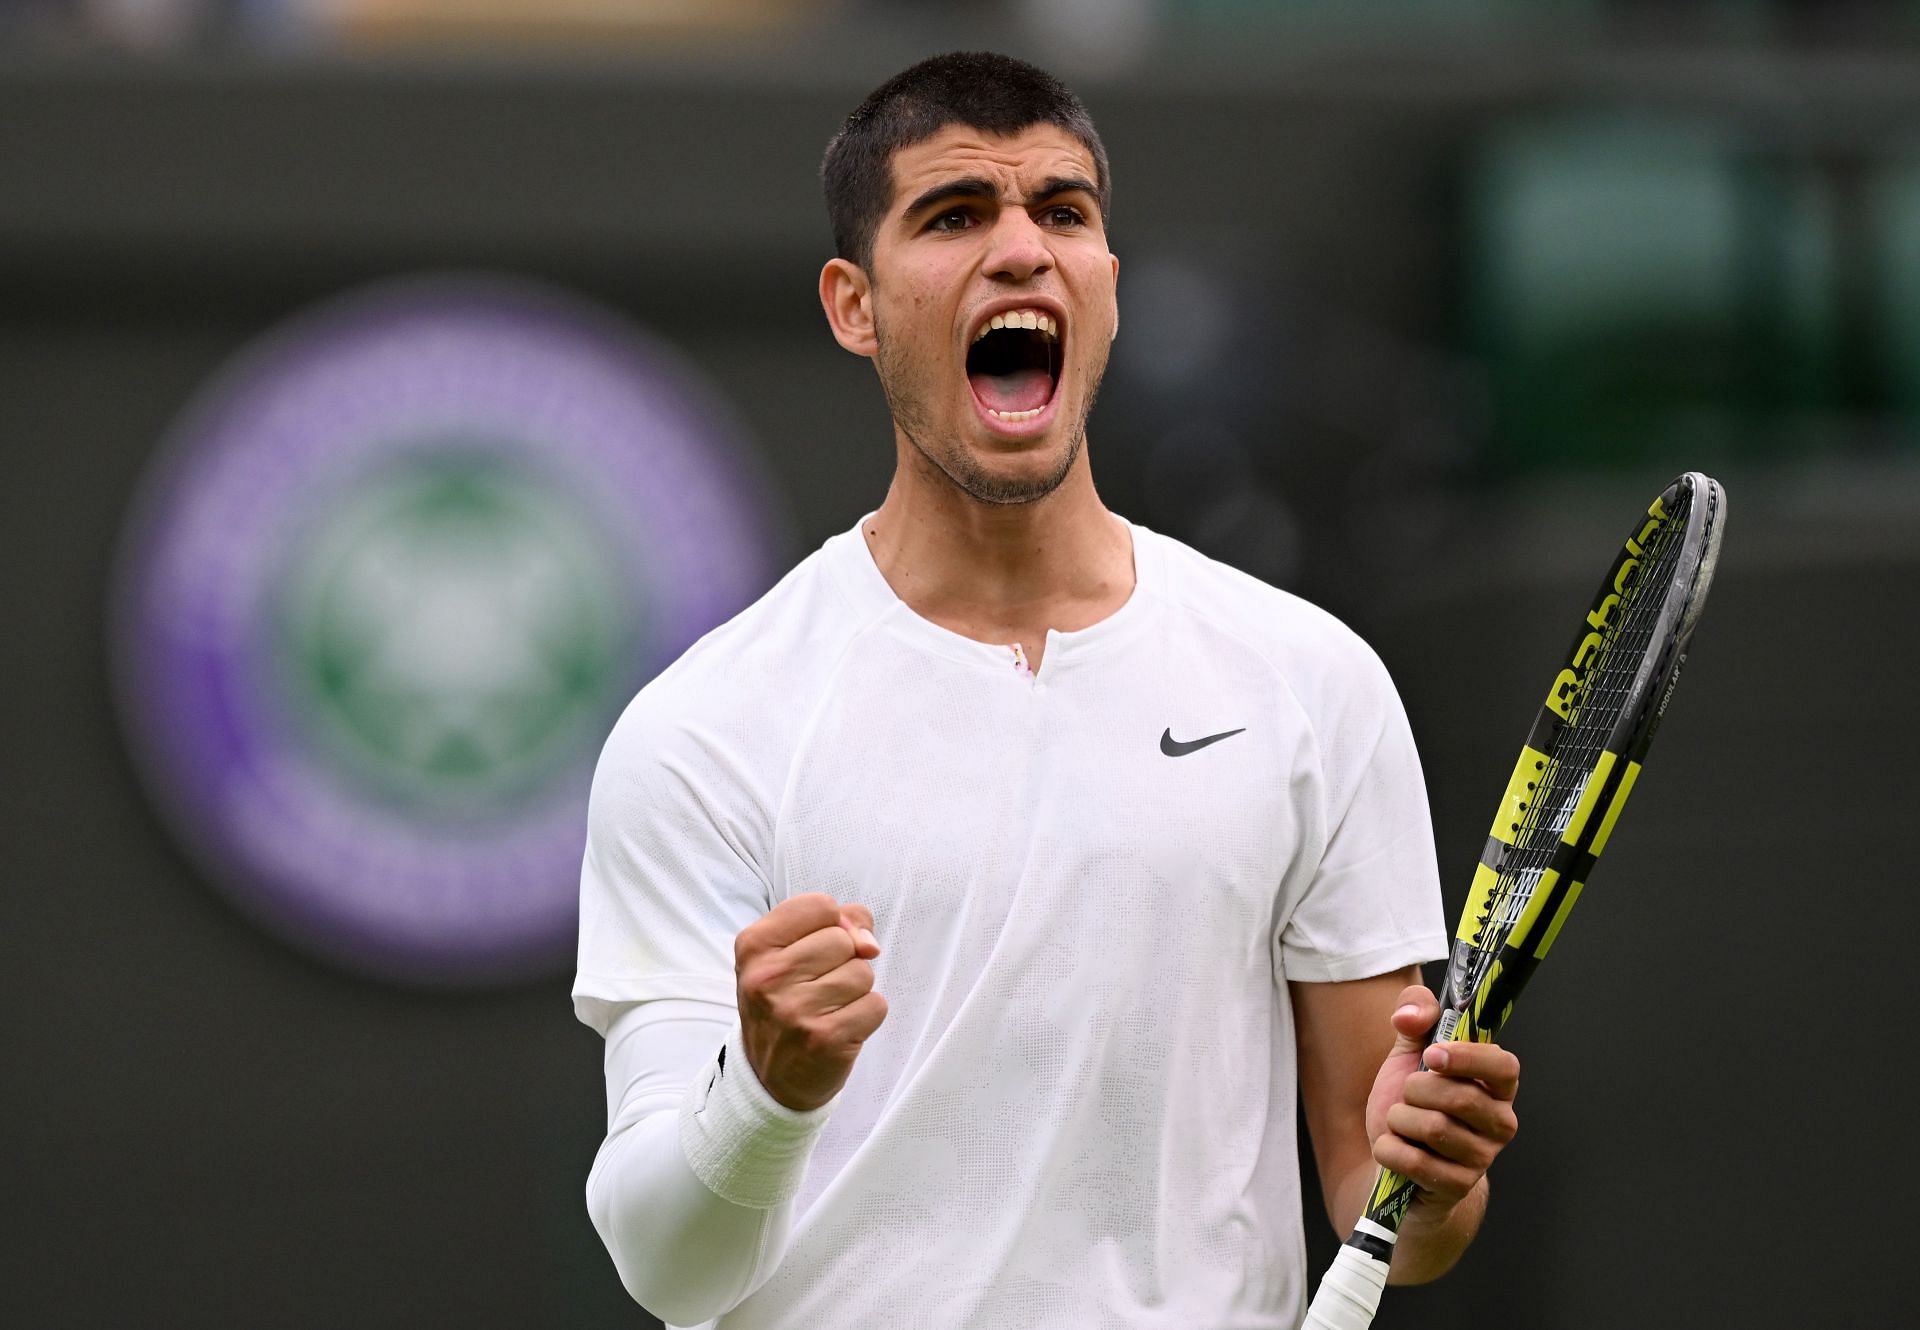 Carlos Alcaraz is the youngest man to begin the main draw at Wimbledon this year